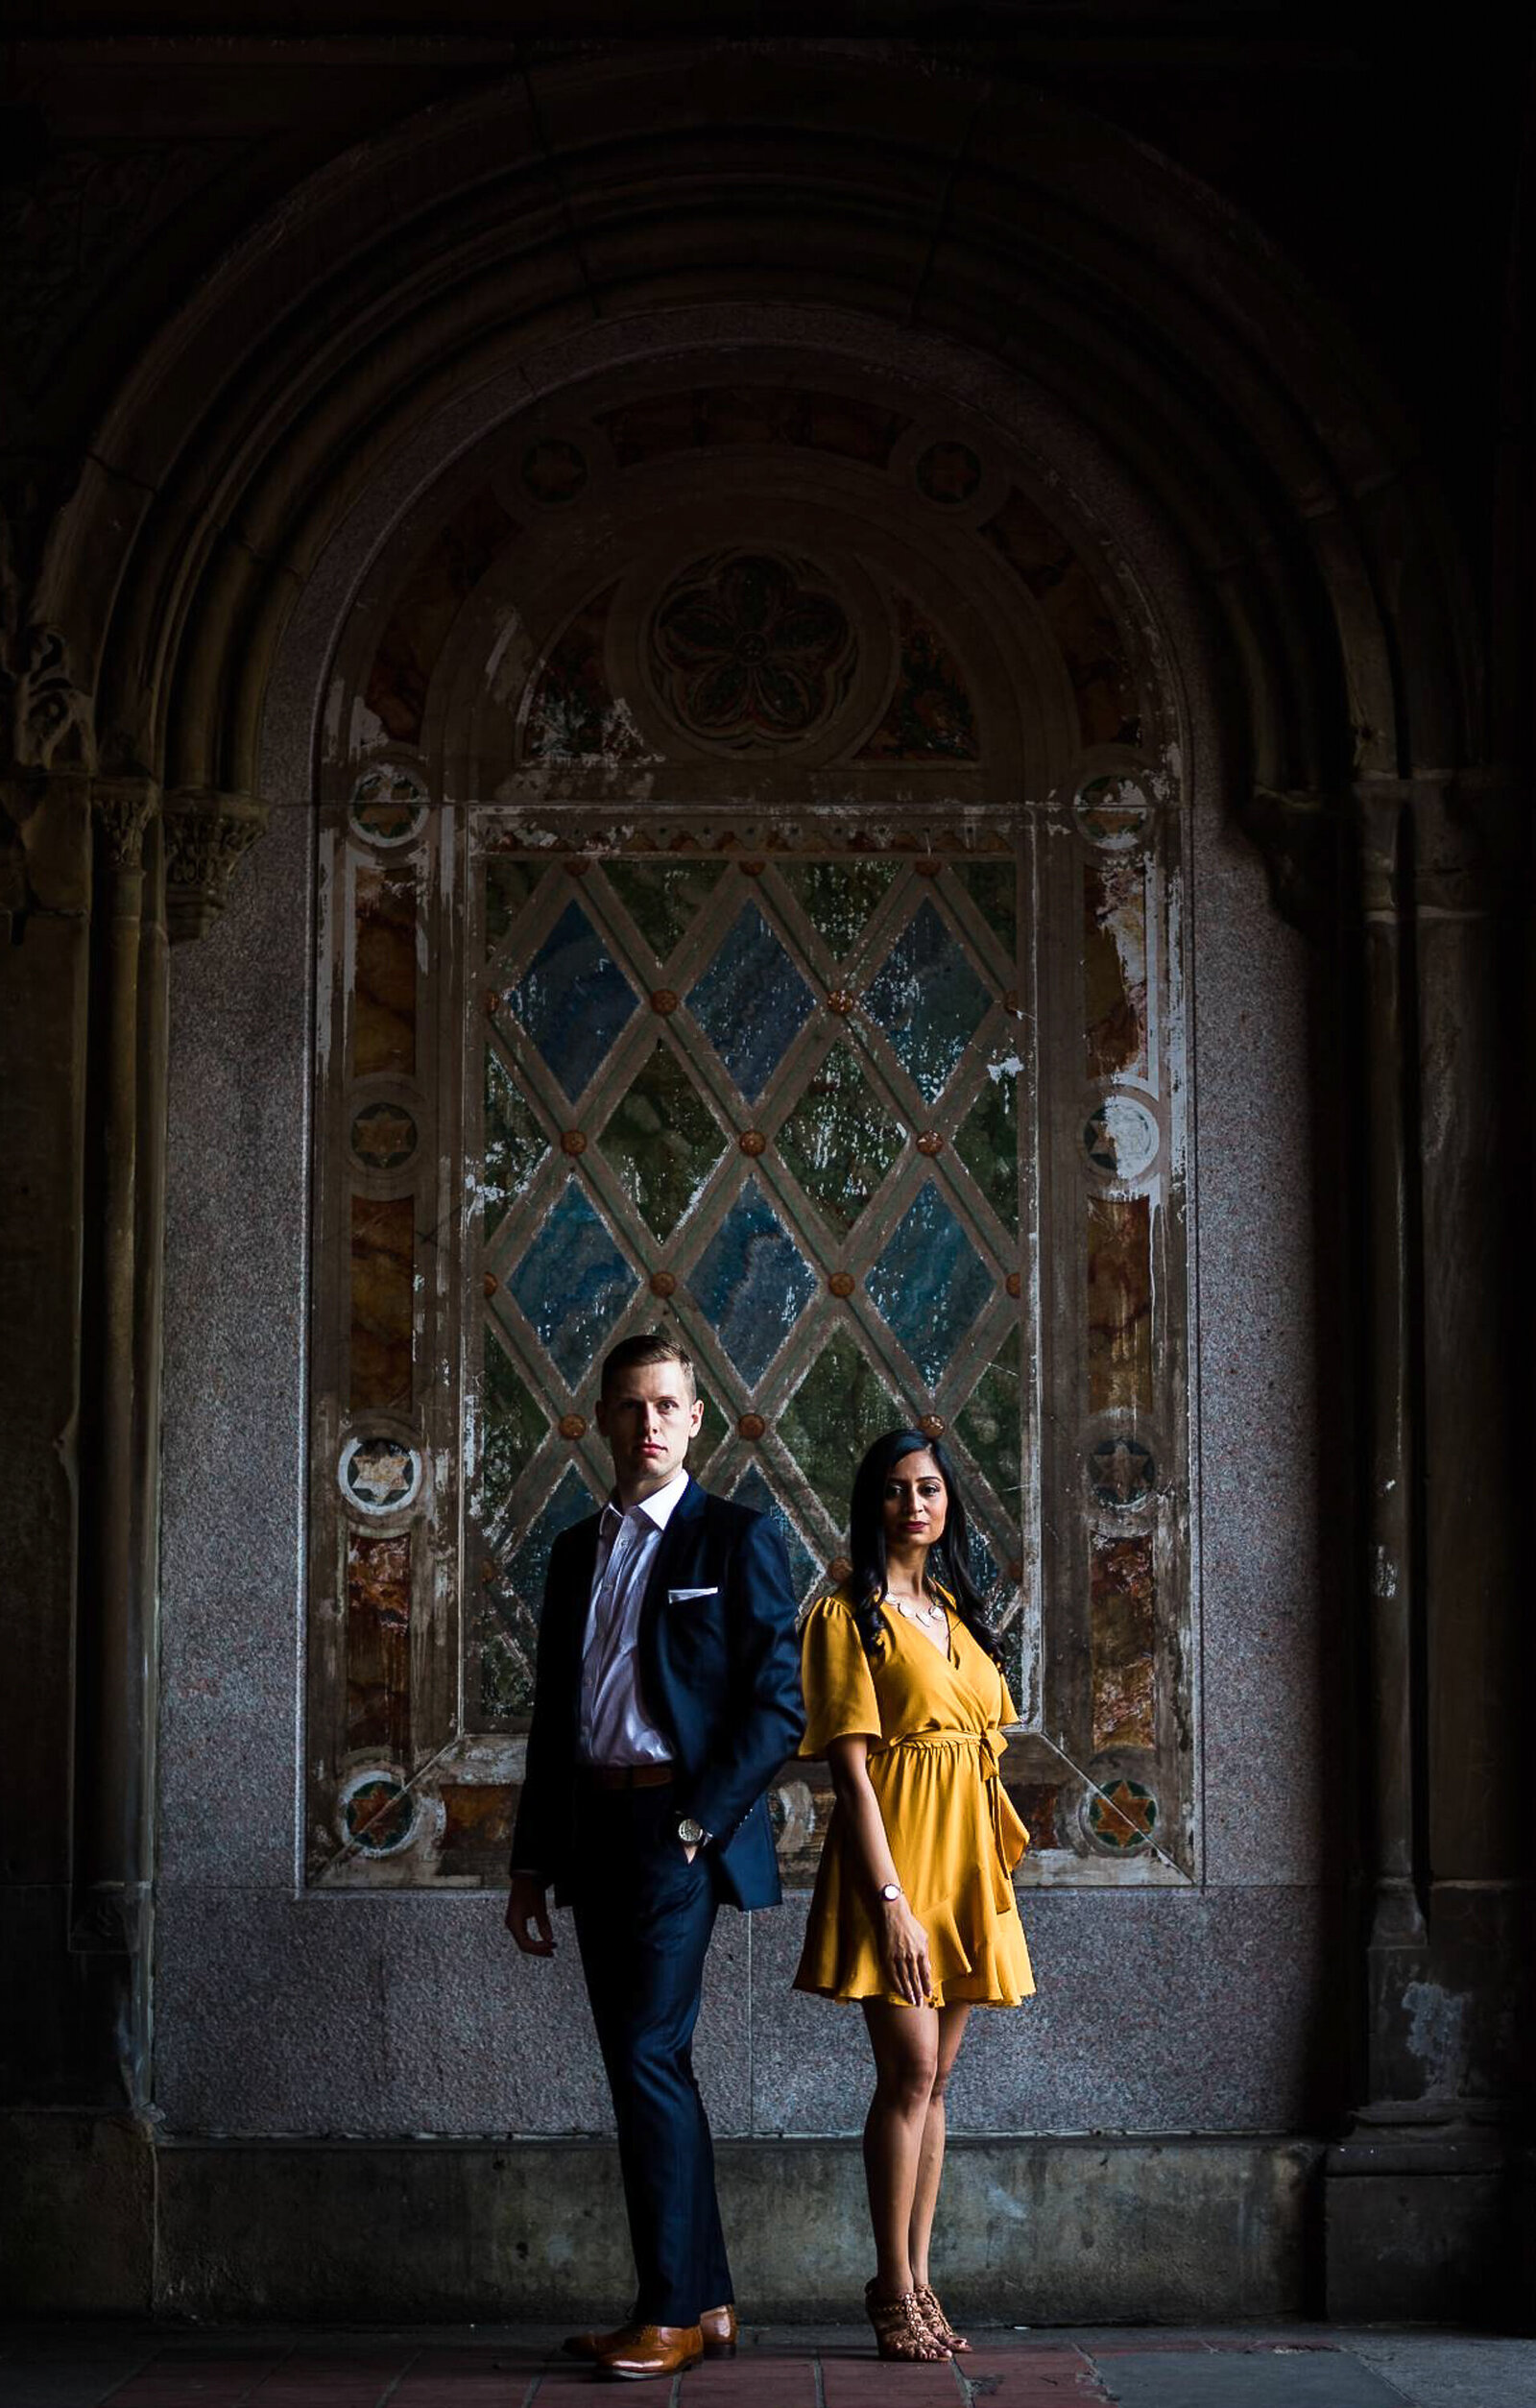 Create atmospheric, moody engagement photos in NJ & NYC with Ishan Fotografi.